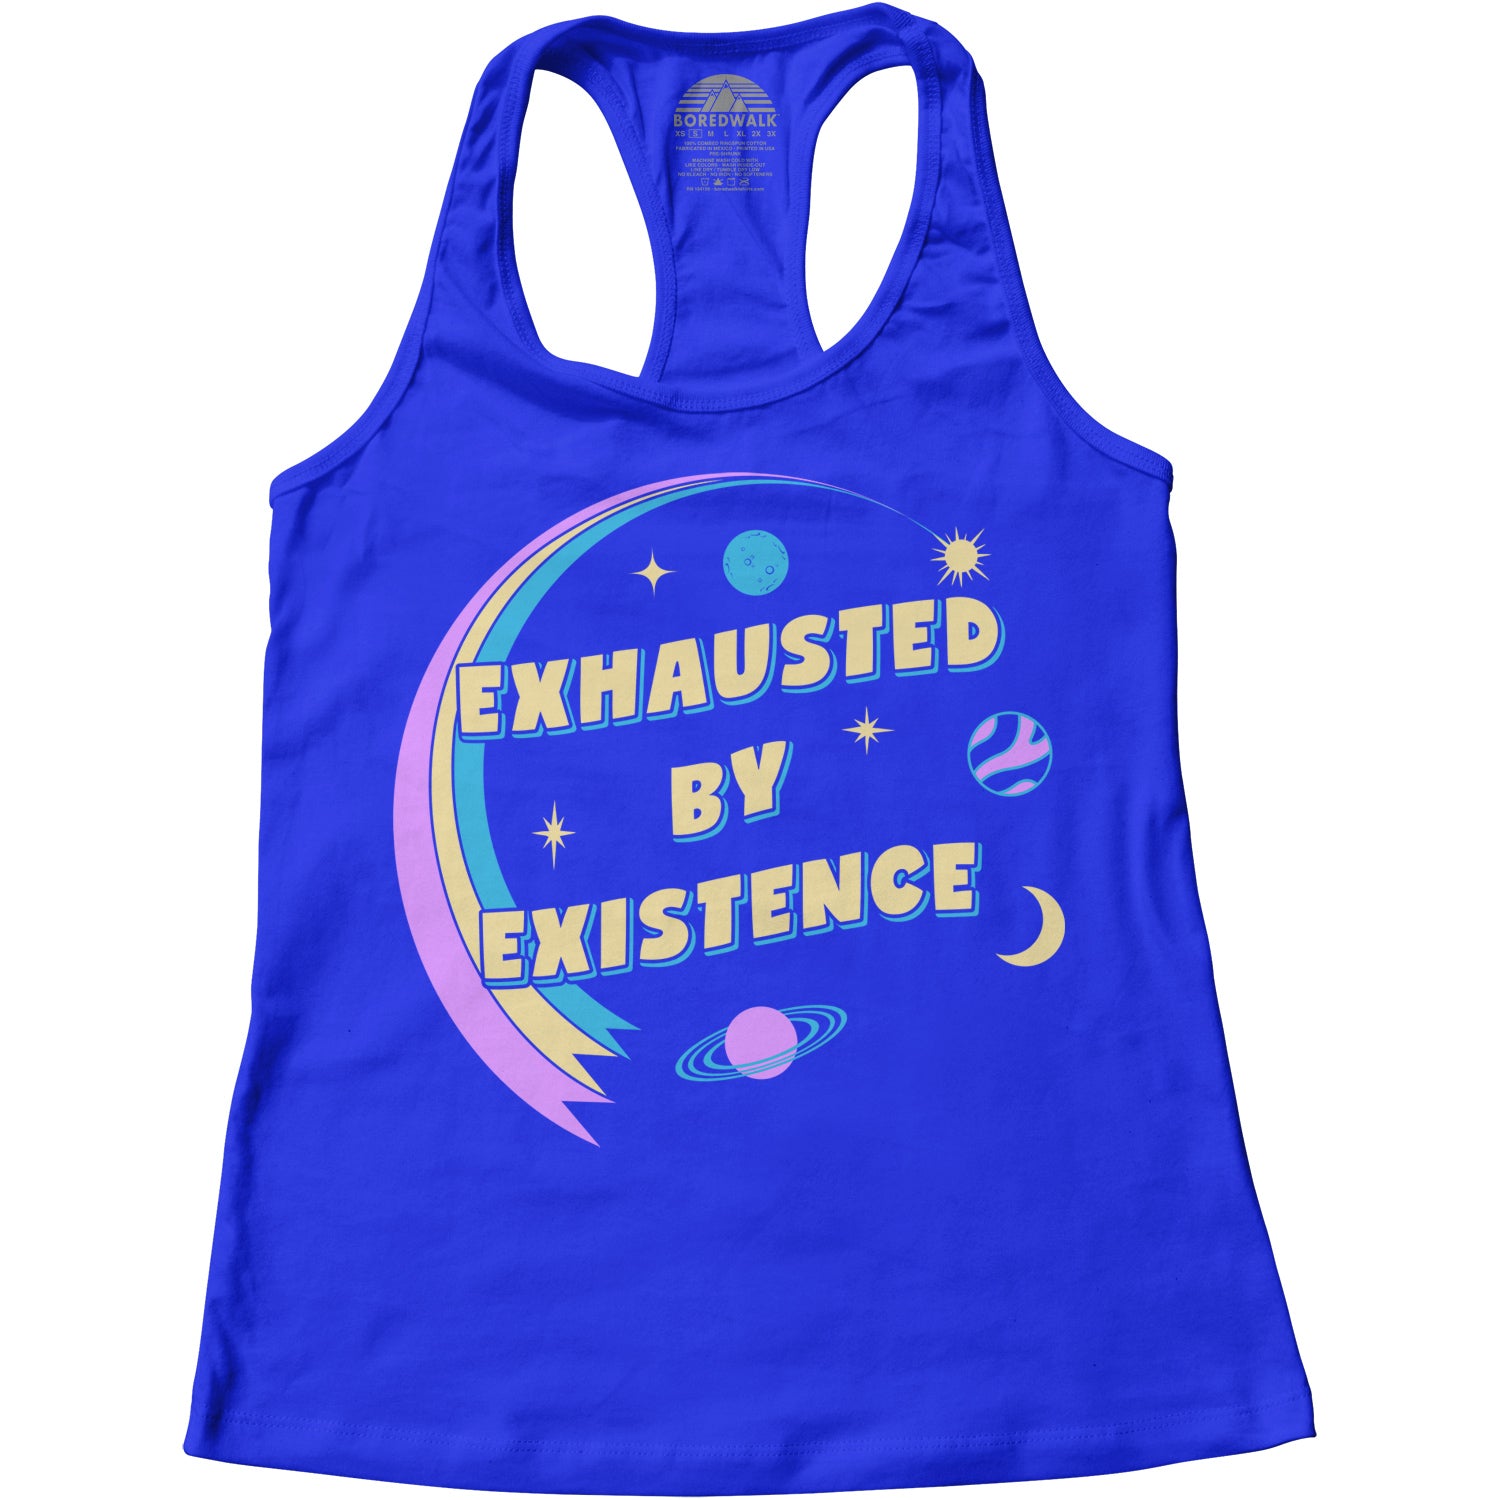 Women's Exhausted By Existence Racerback Tank Top